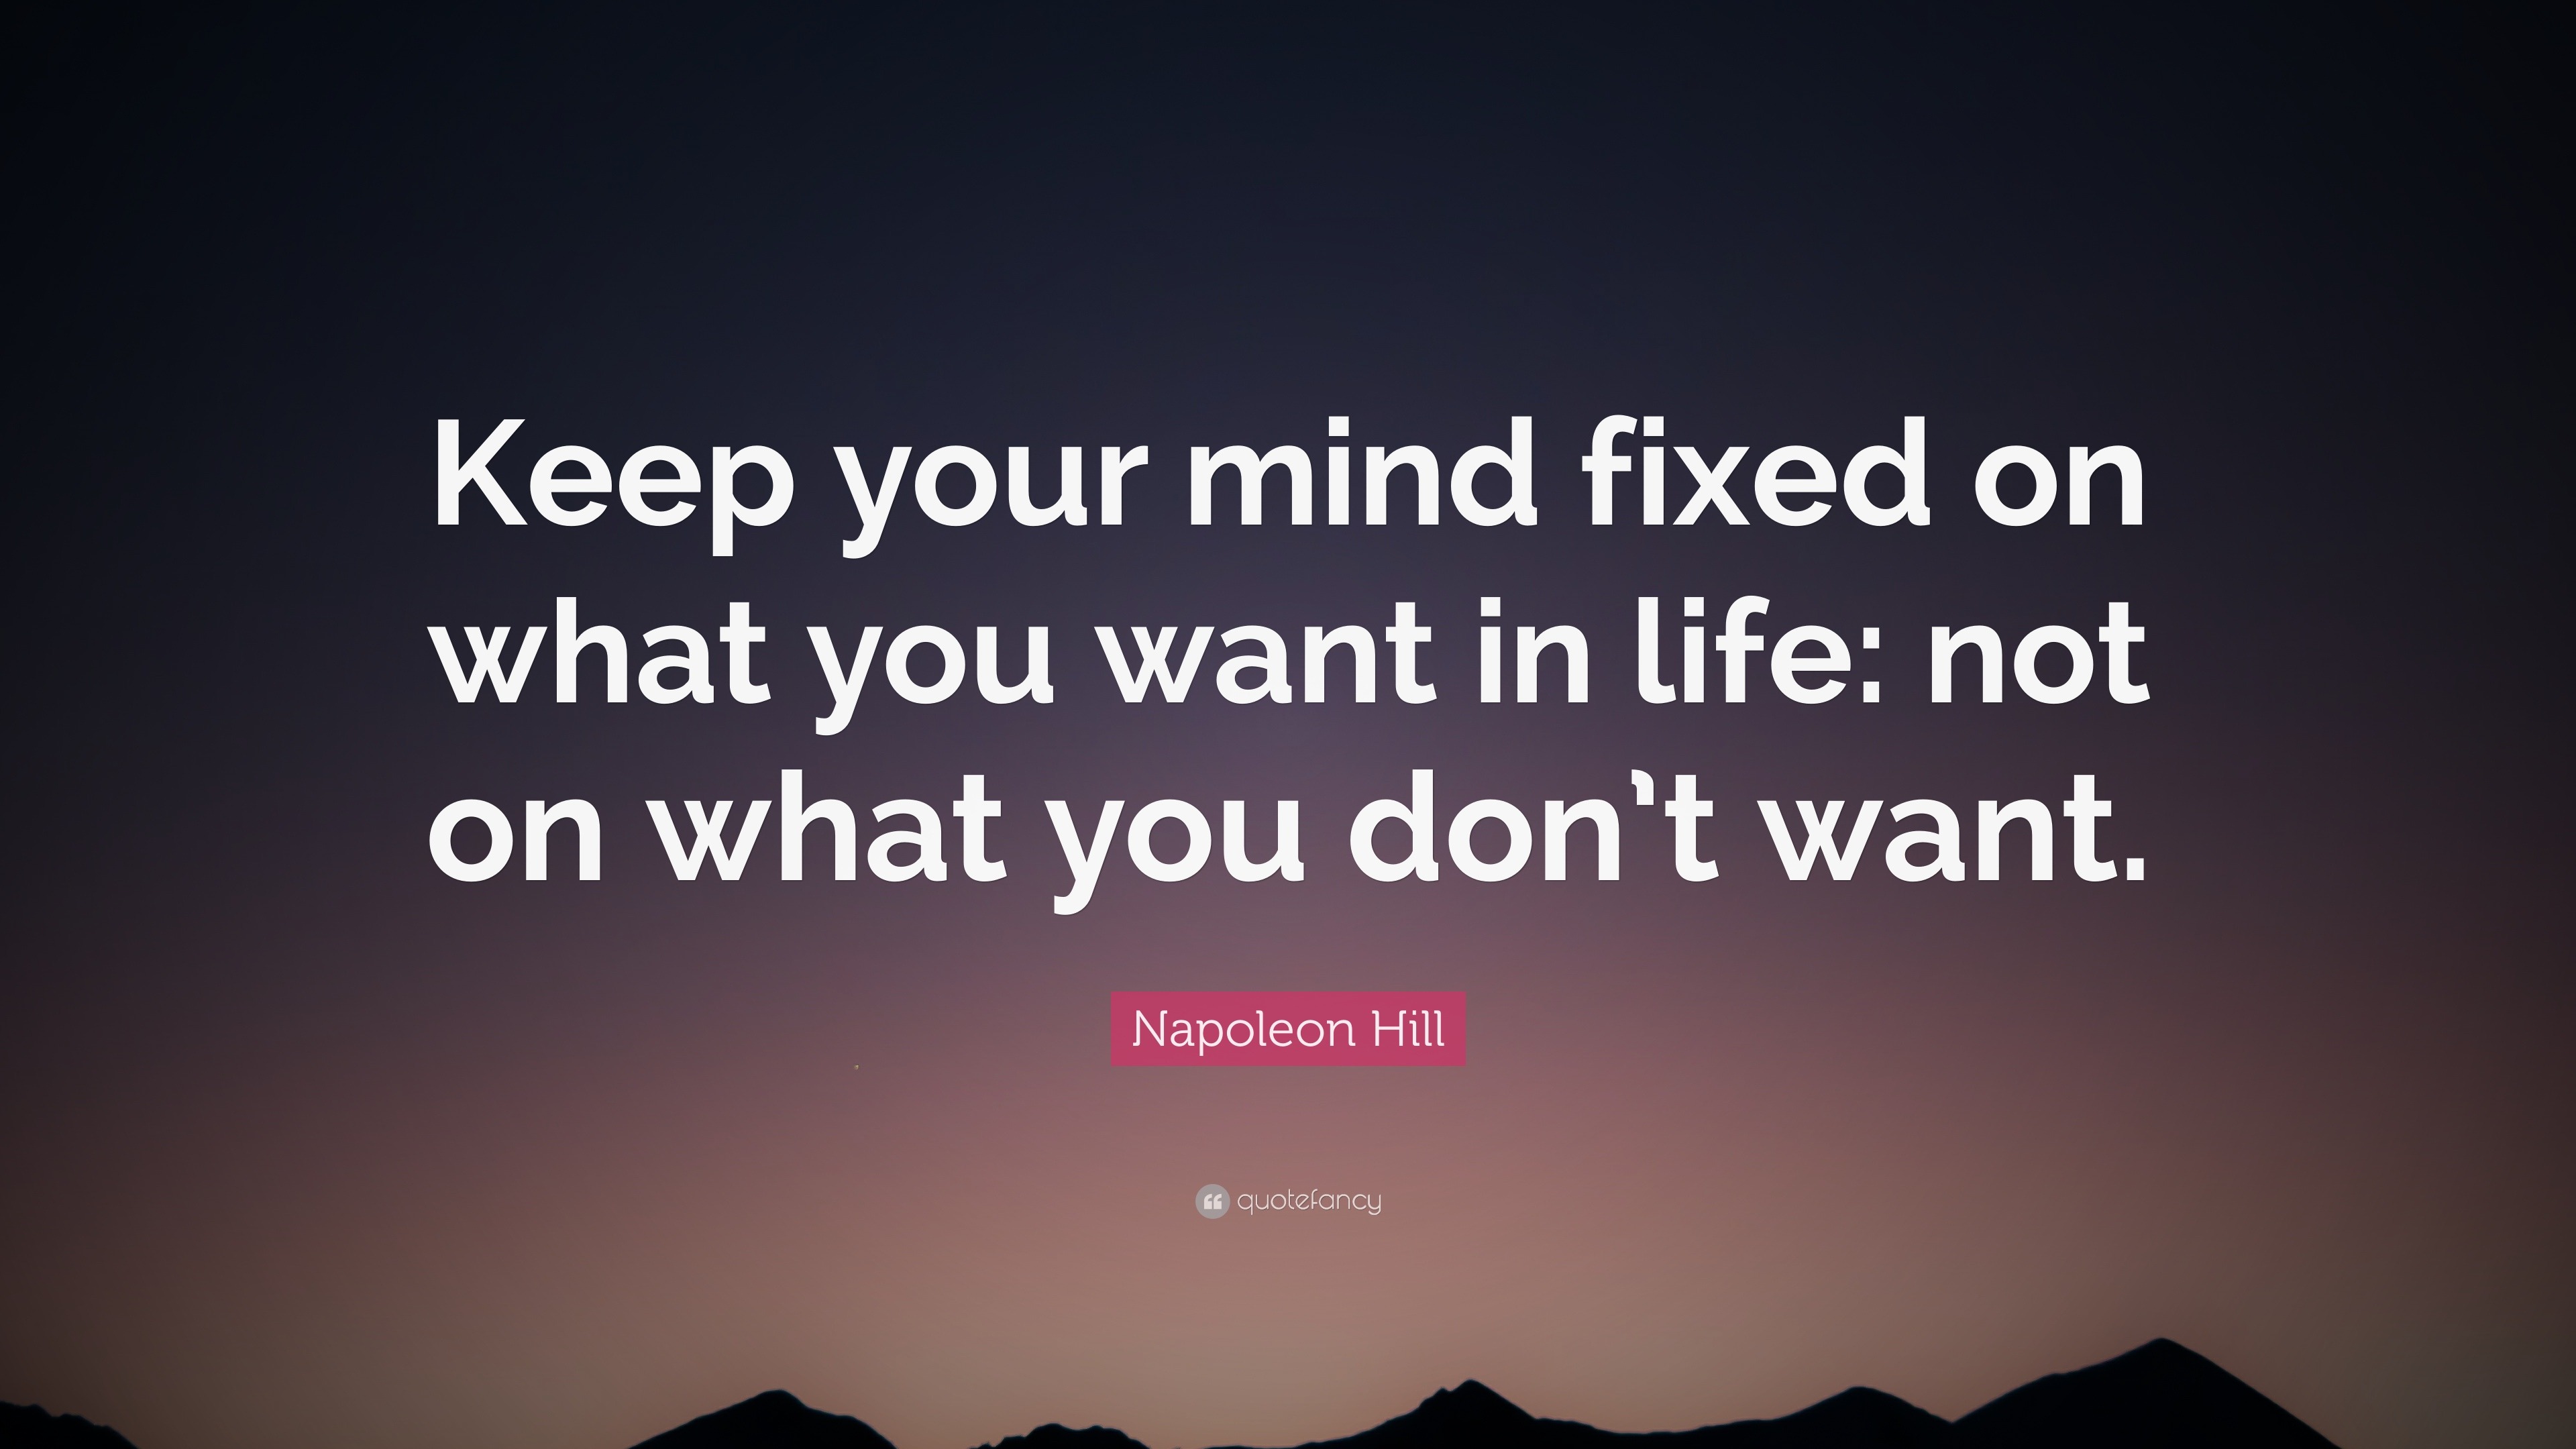 Napoleon Hill Quote: “Keep your mind fixed on what you want in life ...